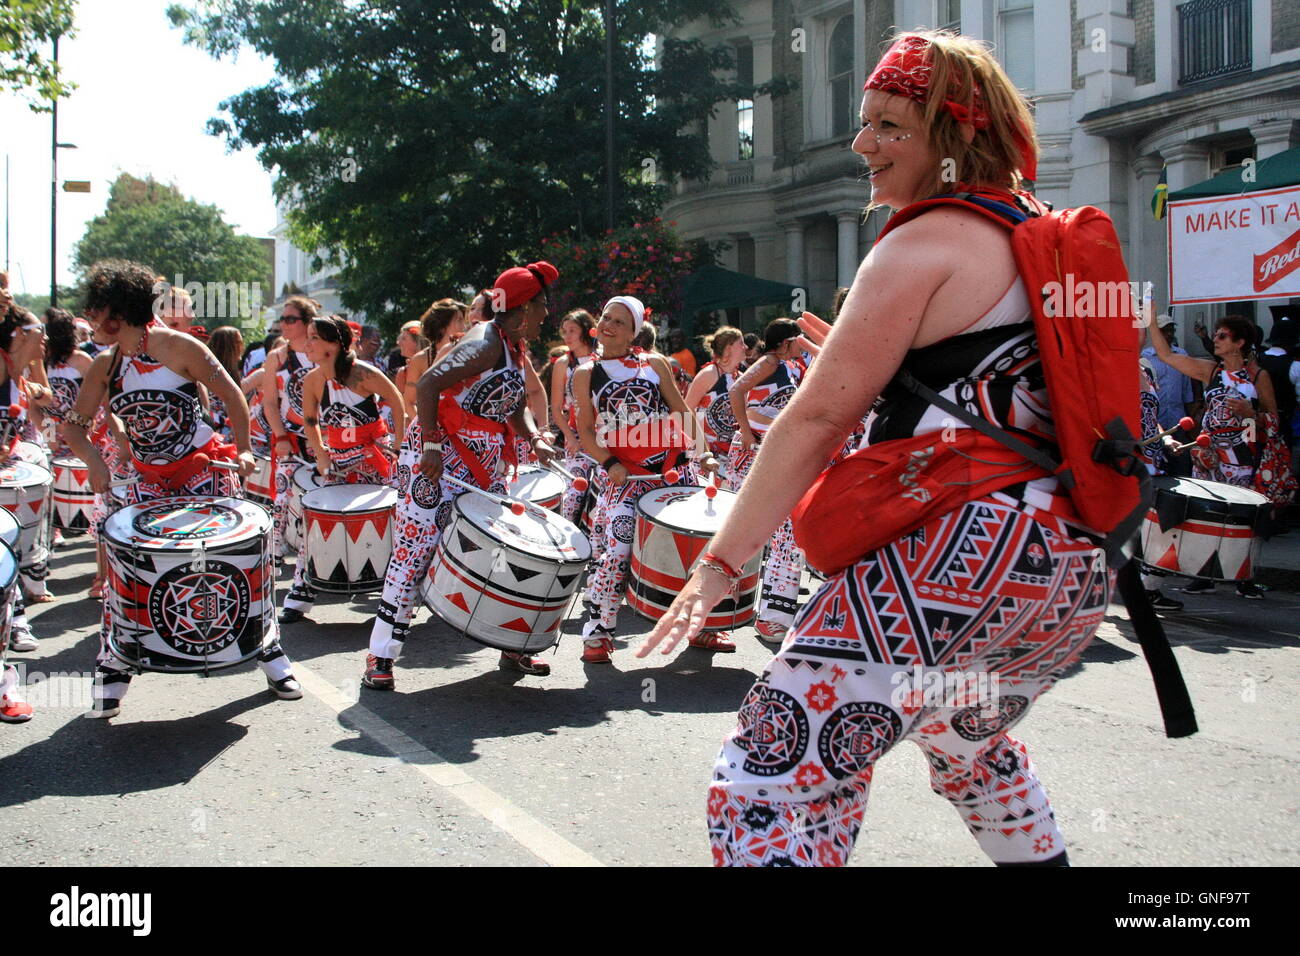 London, UK.  29th August 2016.  Batala London Perform at Europe's largest street festival, Notting Hill Carnival.  The second of two days of street festival where members of the public perform music and dancing, dressed in brightly coloured costumes, in a carnival procession.   They take part on foot or riding on colourful floats through the streets filled with spectators. The vast festival area, with many food vendors and stages hosting live bands, fills the streets with people enjoying the bank holiday.   Bliss Lane/Alamy Live News Stock Photo